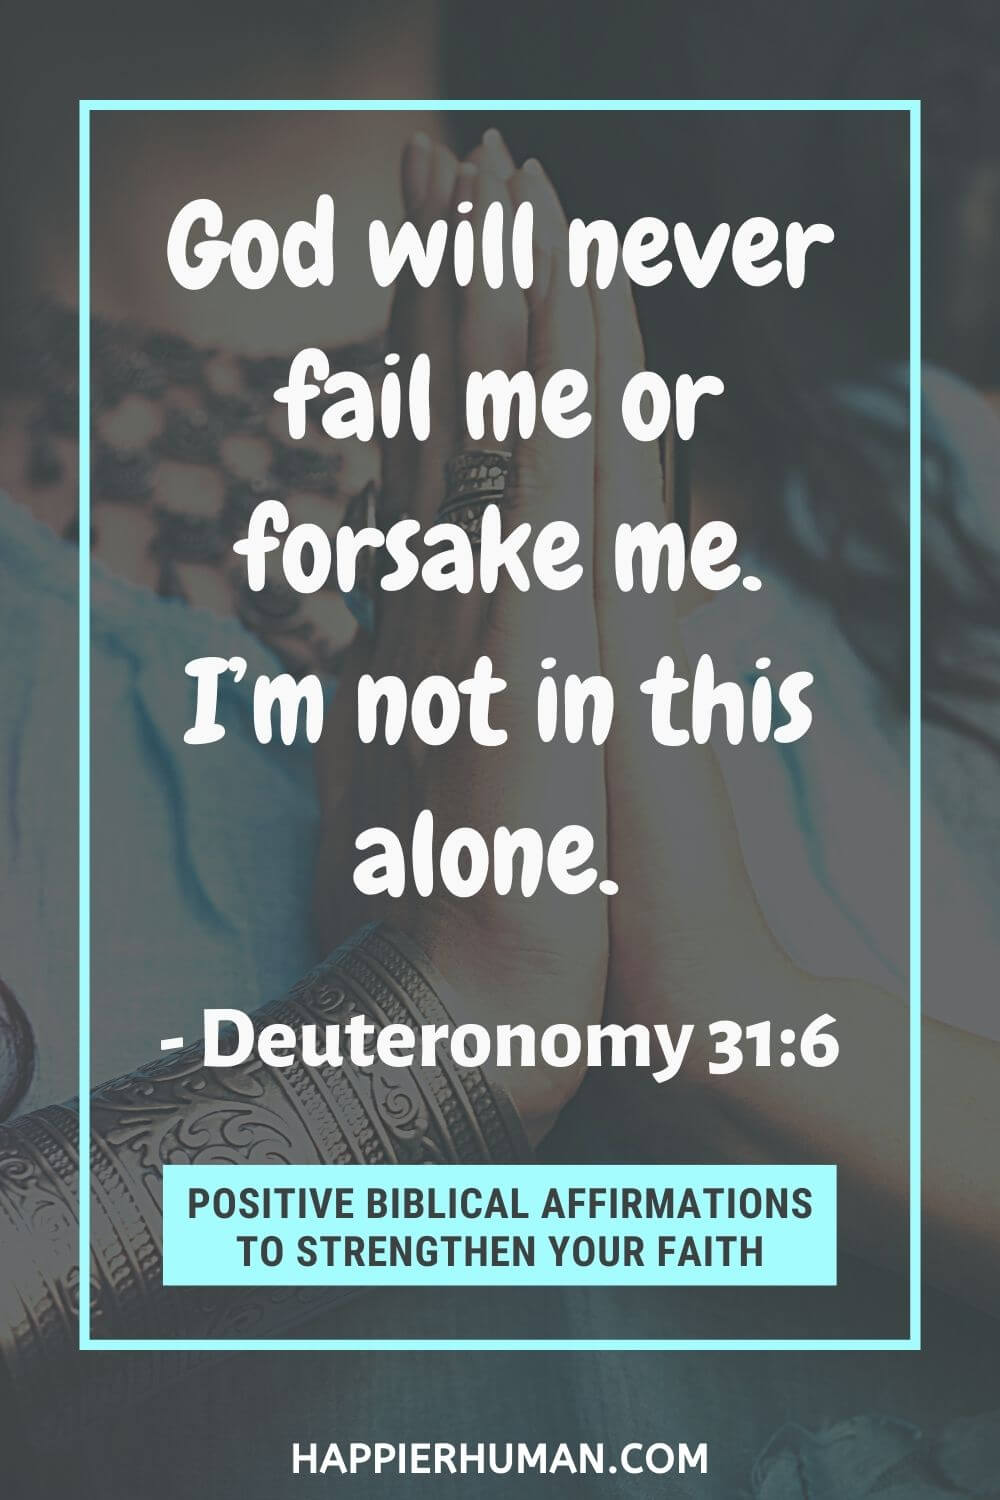 Biblical Affirmations - God will never fail me or forsake me. I’m not in this alone. - Deuteronomy 31:6 | 30 positive affirmations using bible verses | bible affirmations for success | biblical affirmations for women